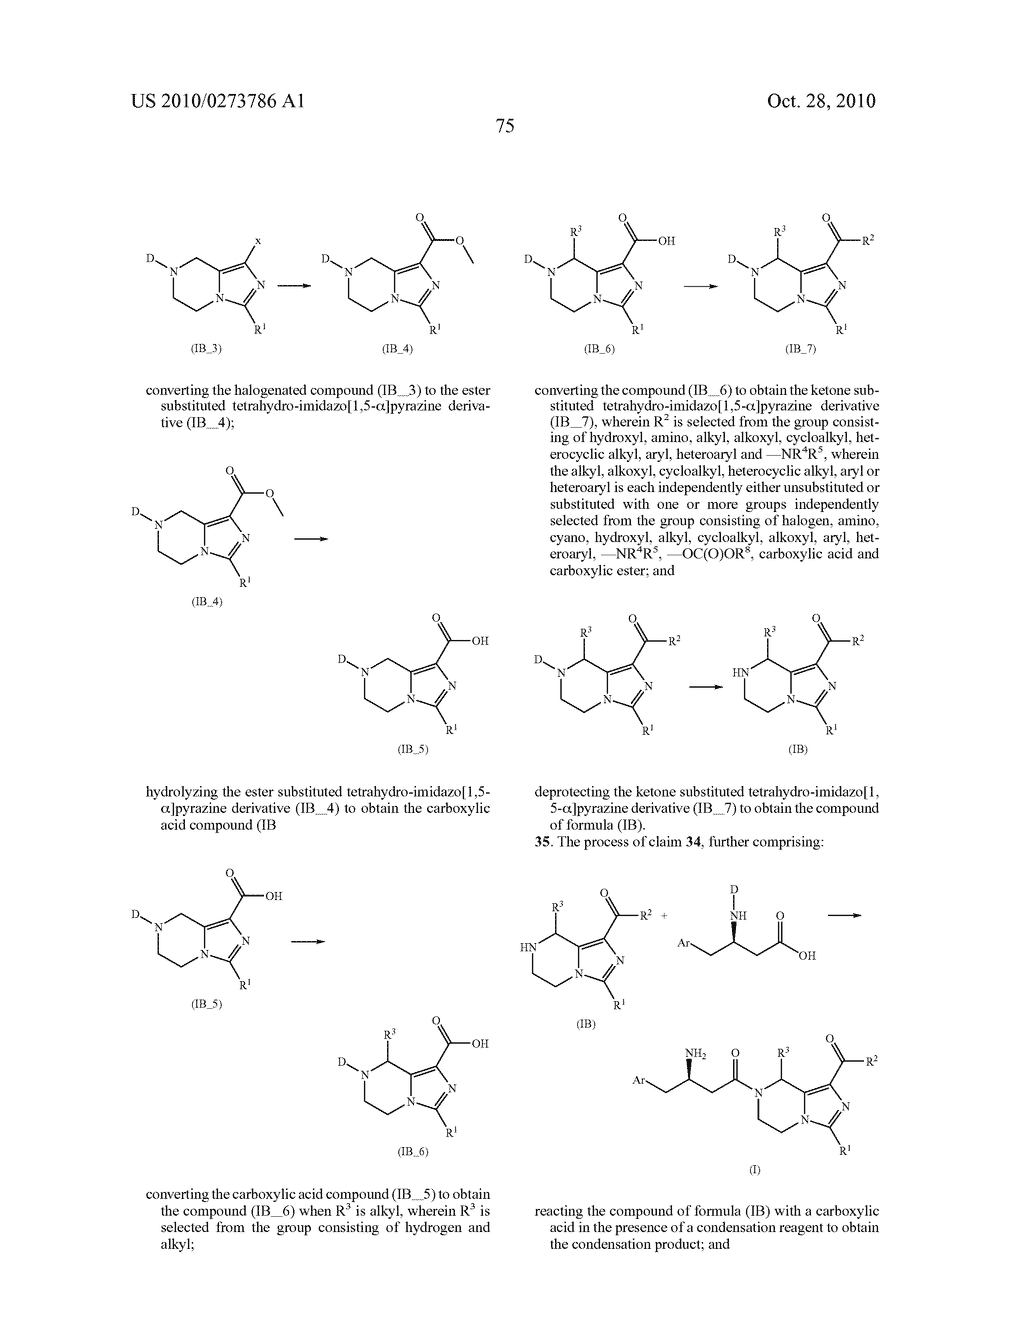 TETRAHYDRO-IMIDAZ0[1,5-A]PYRAZINE DERIVATIVES, PREPARATION PROCESS AND MEDICINAL USE THEREOF - diagram, schematic, and image 76